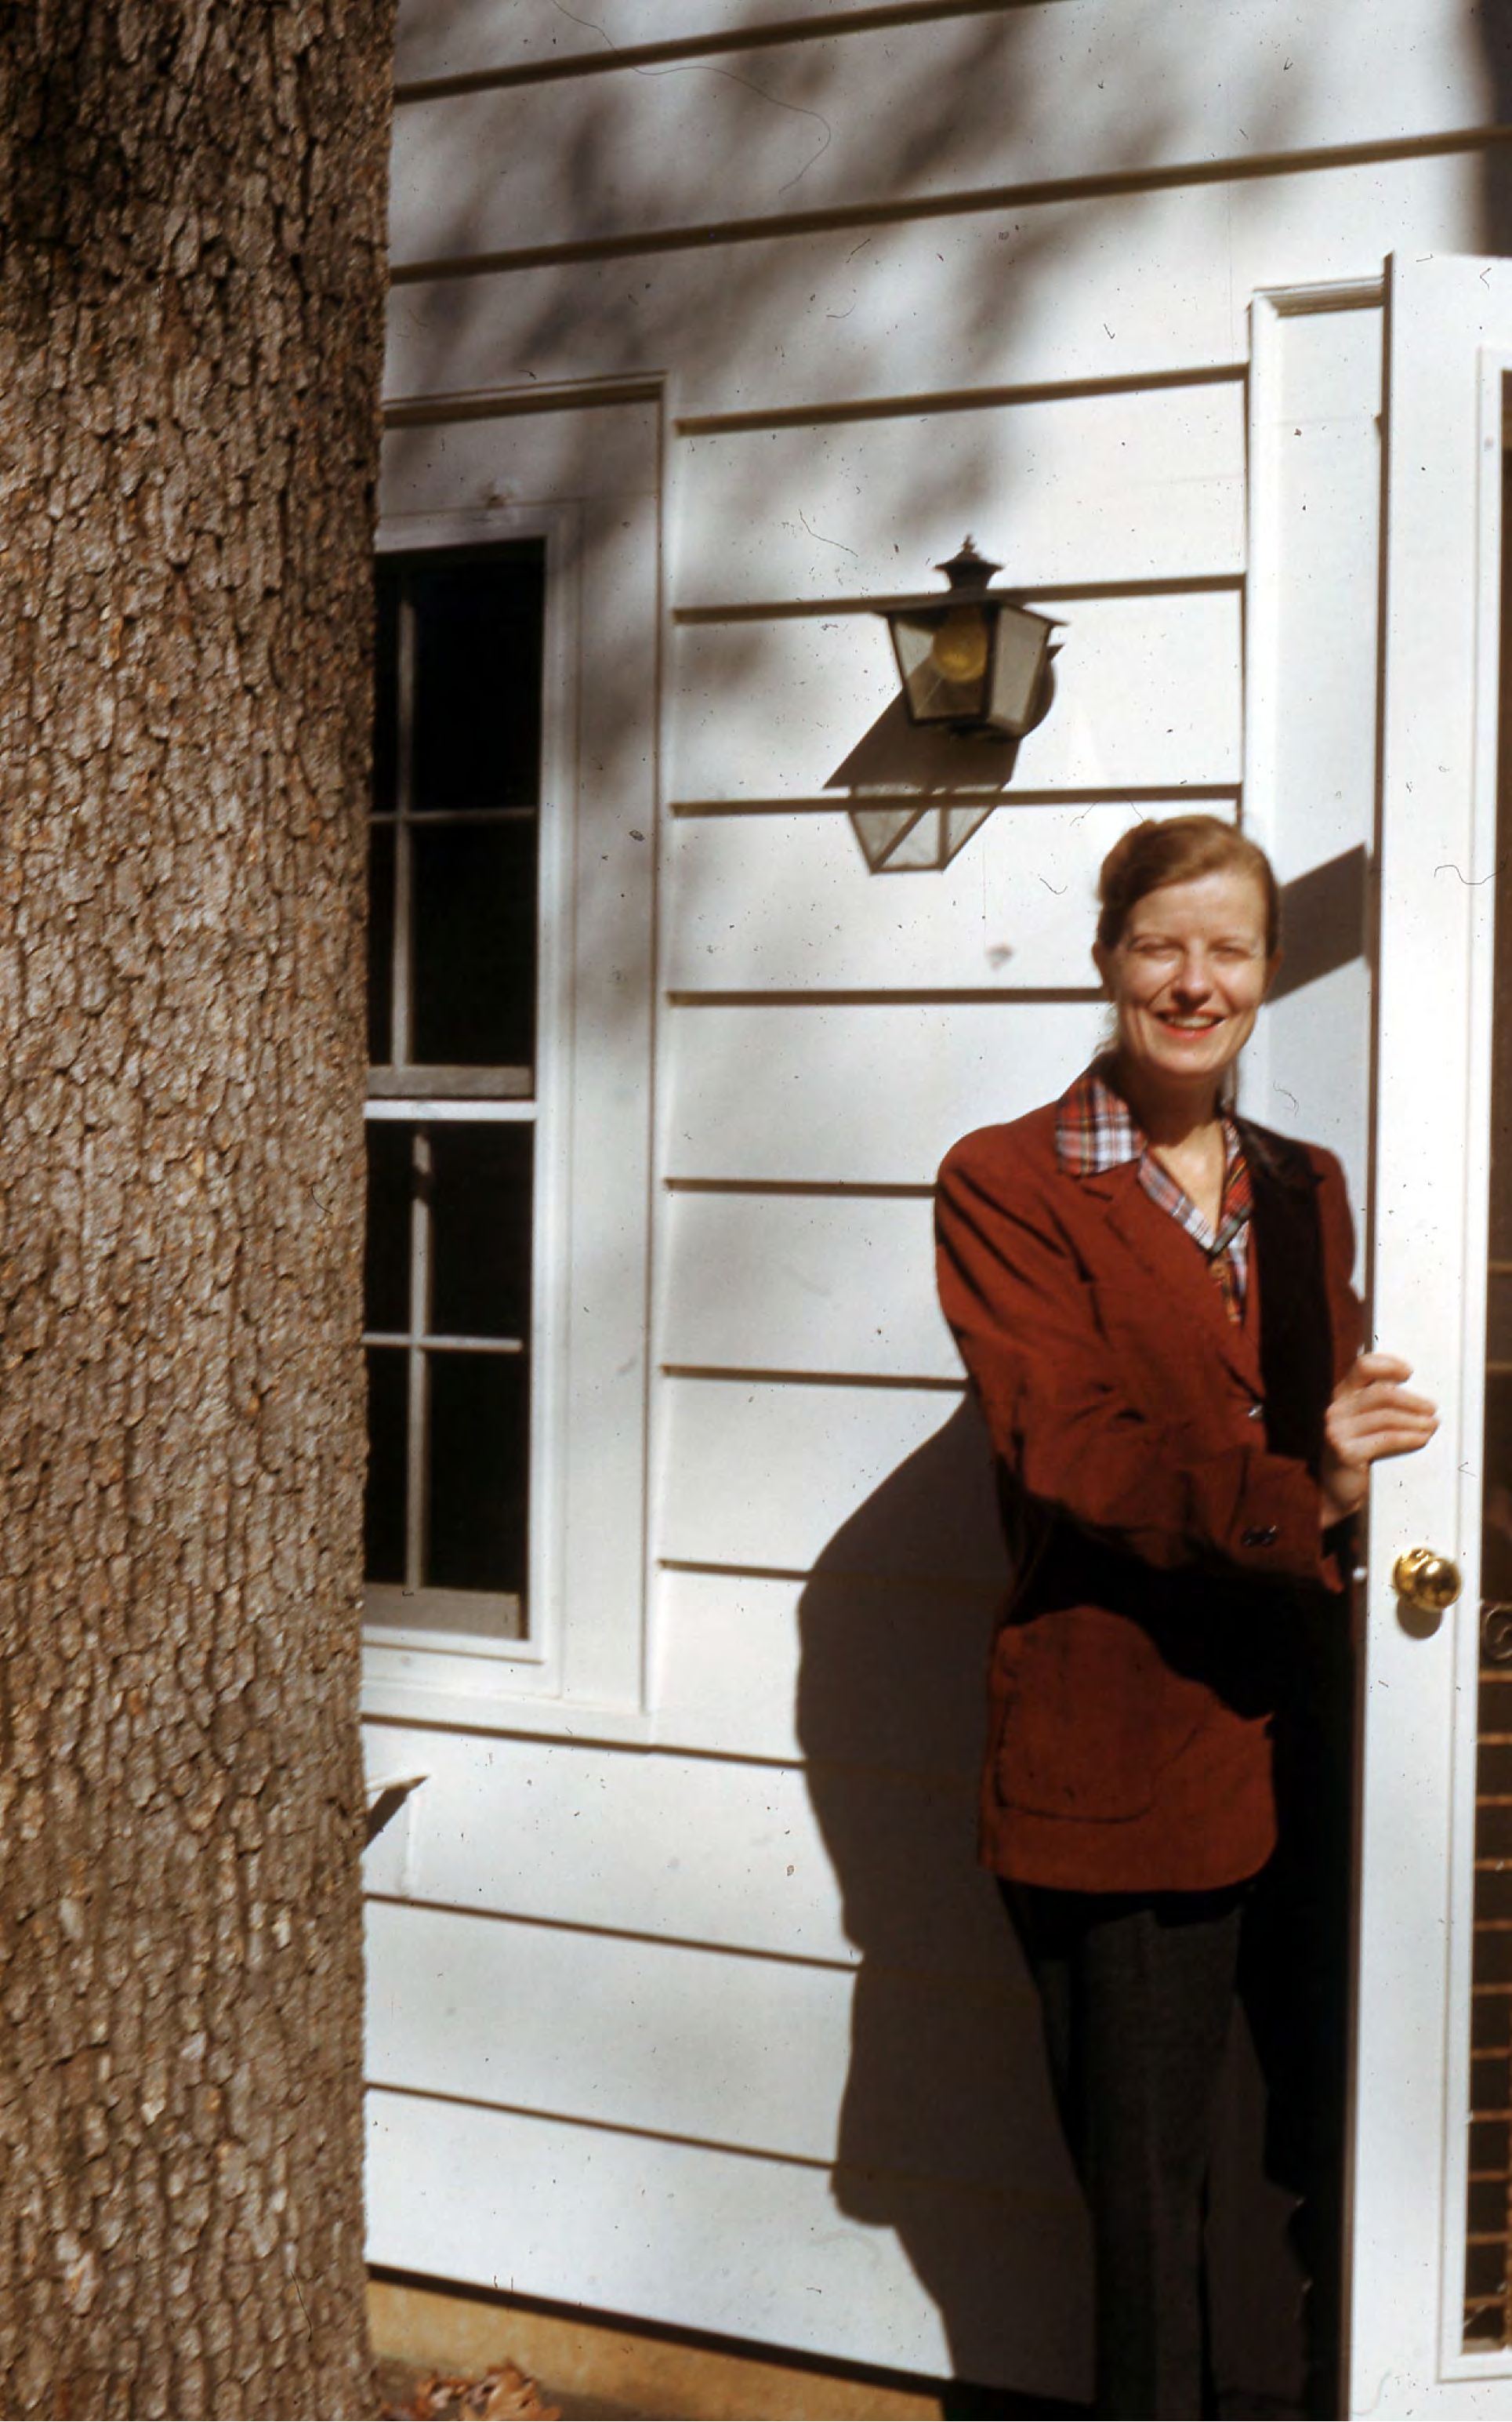 Photograph of woman in front of house [JPG]